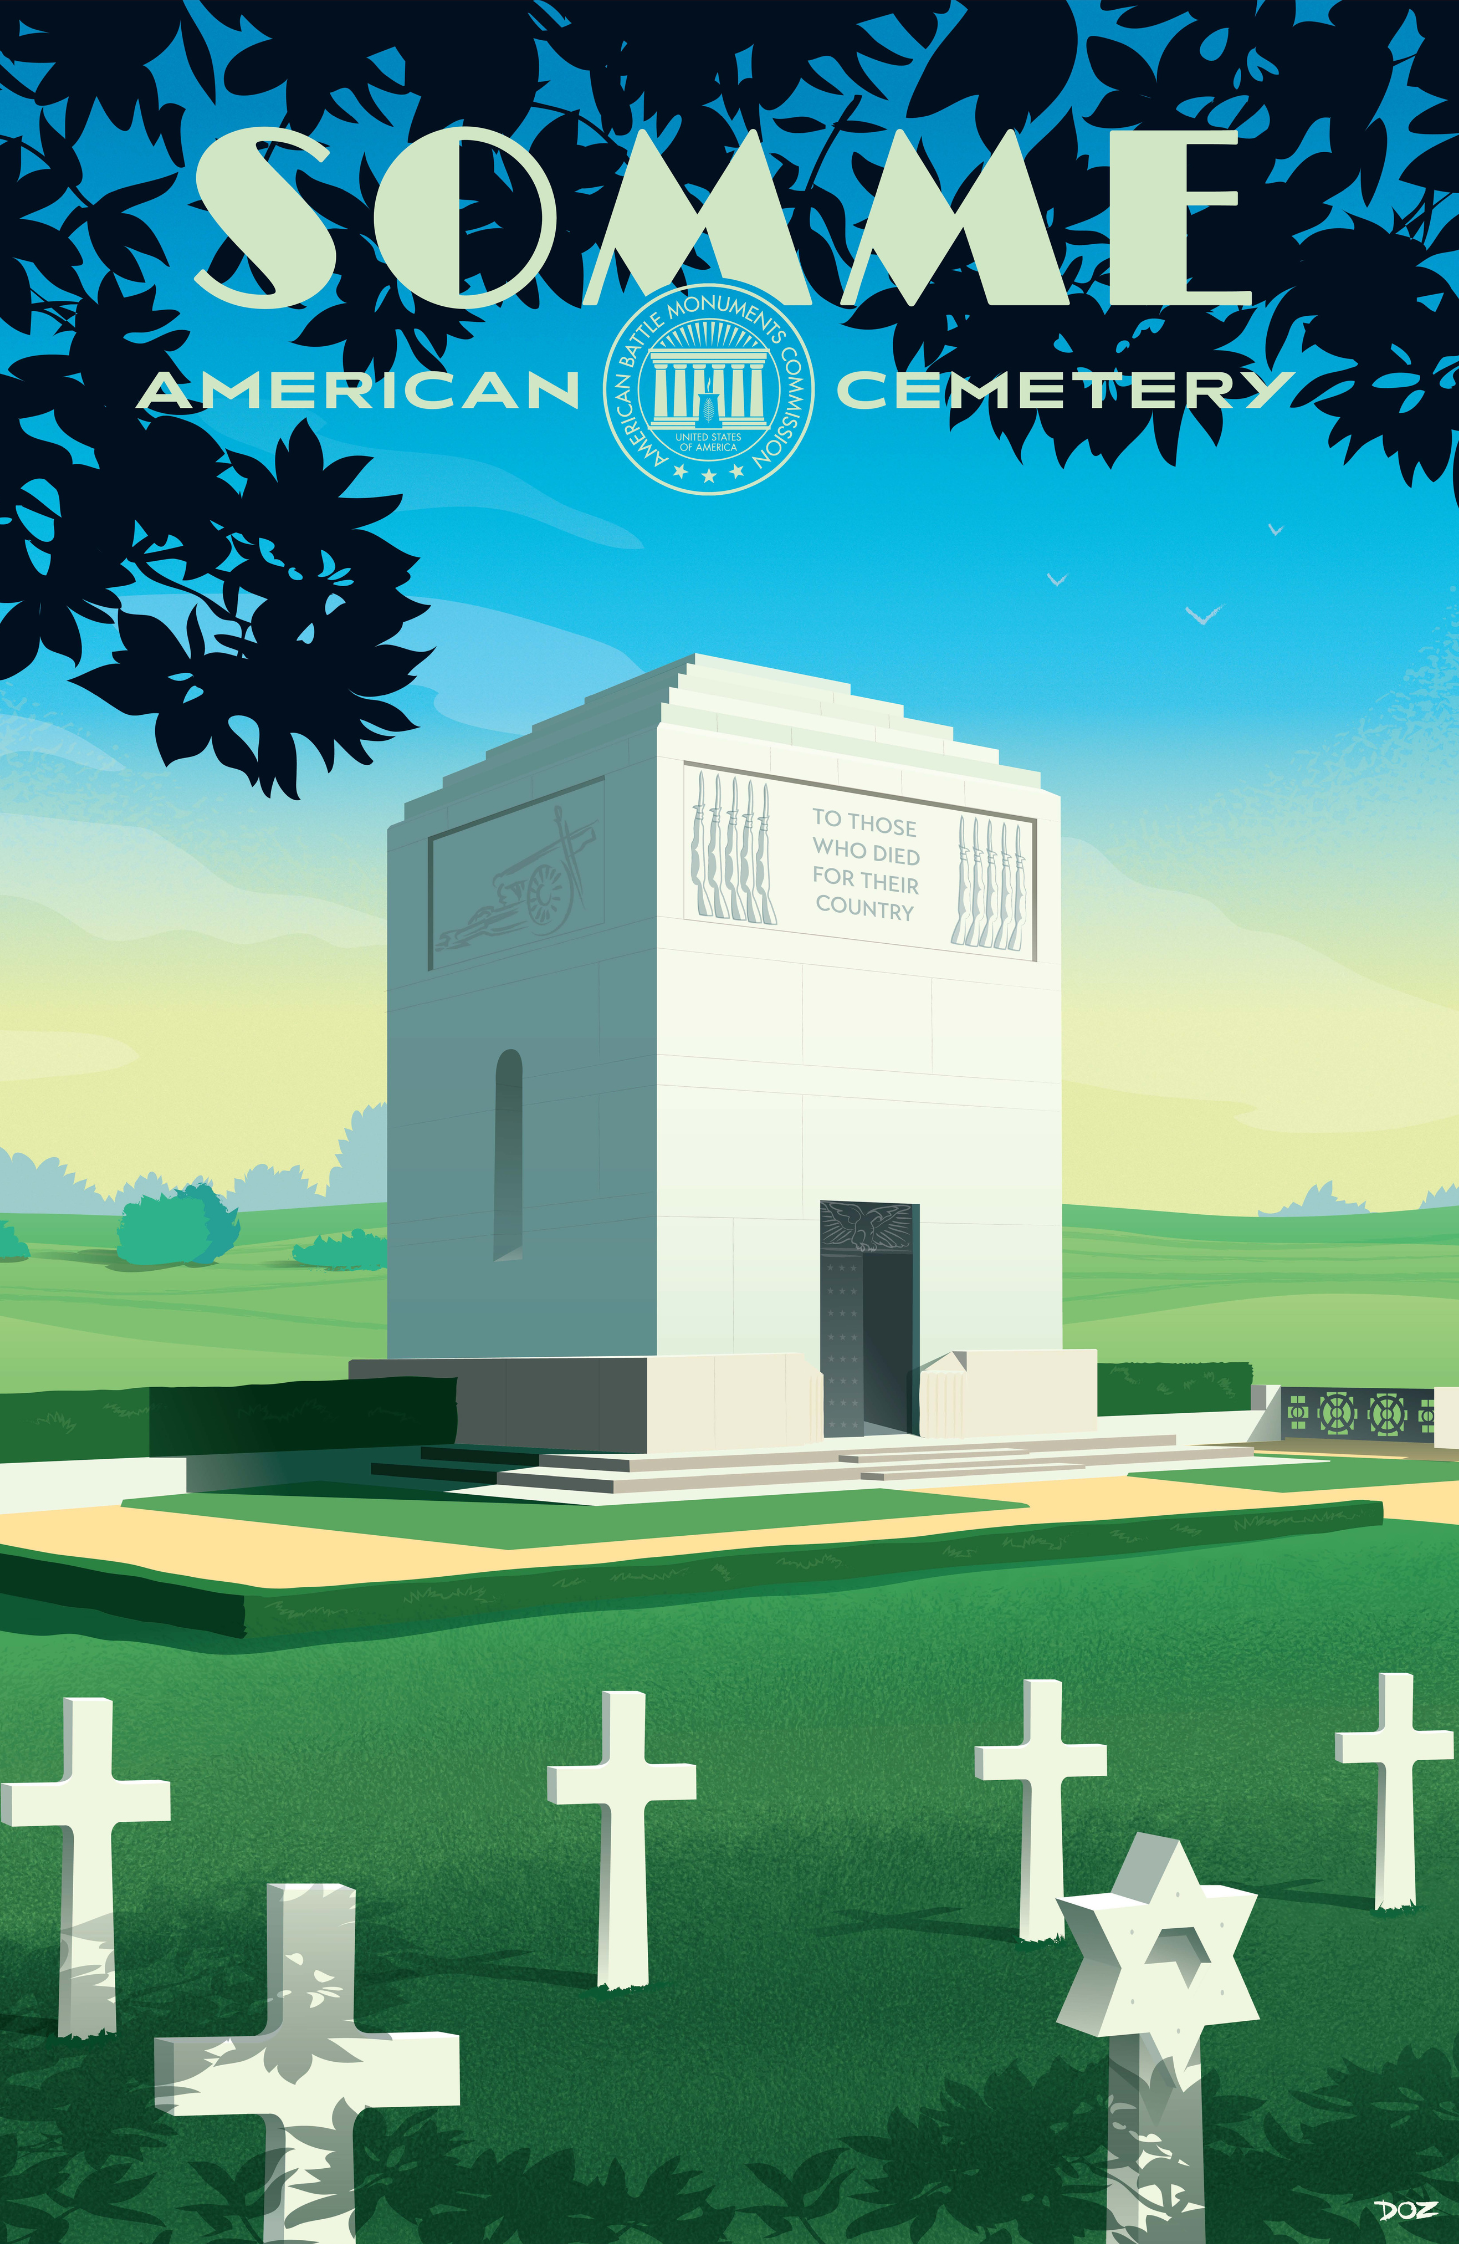 Vintage poster of Somme American Cemetery created to mark ABMC Centennial